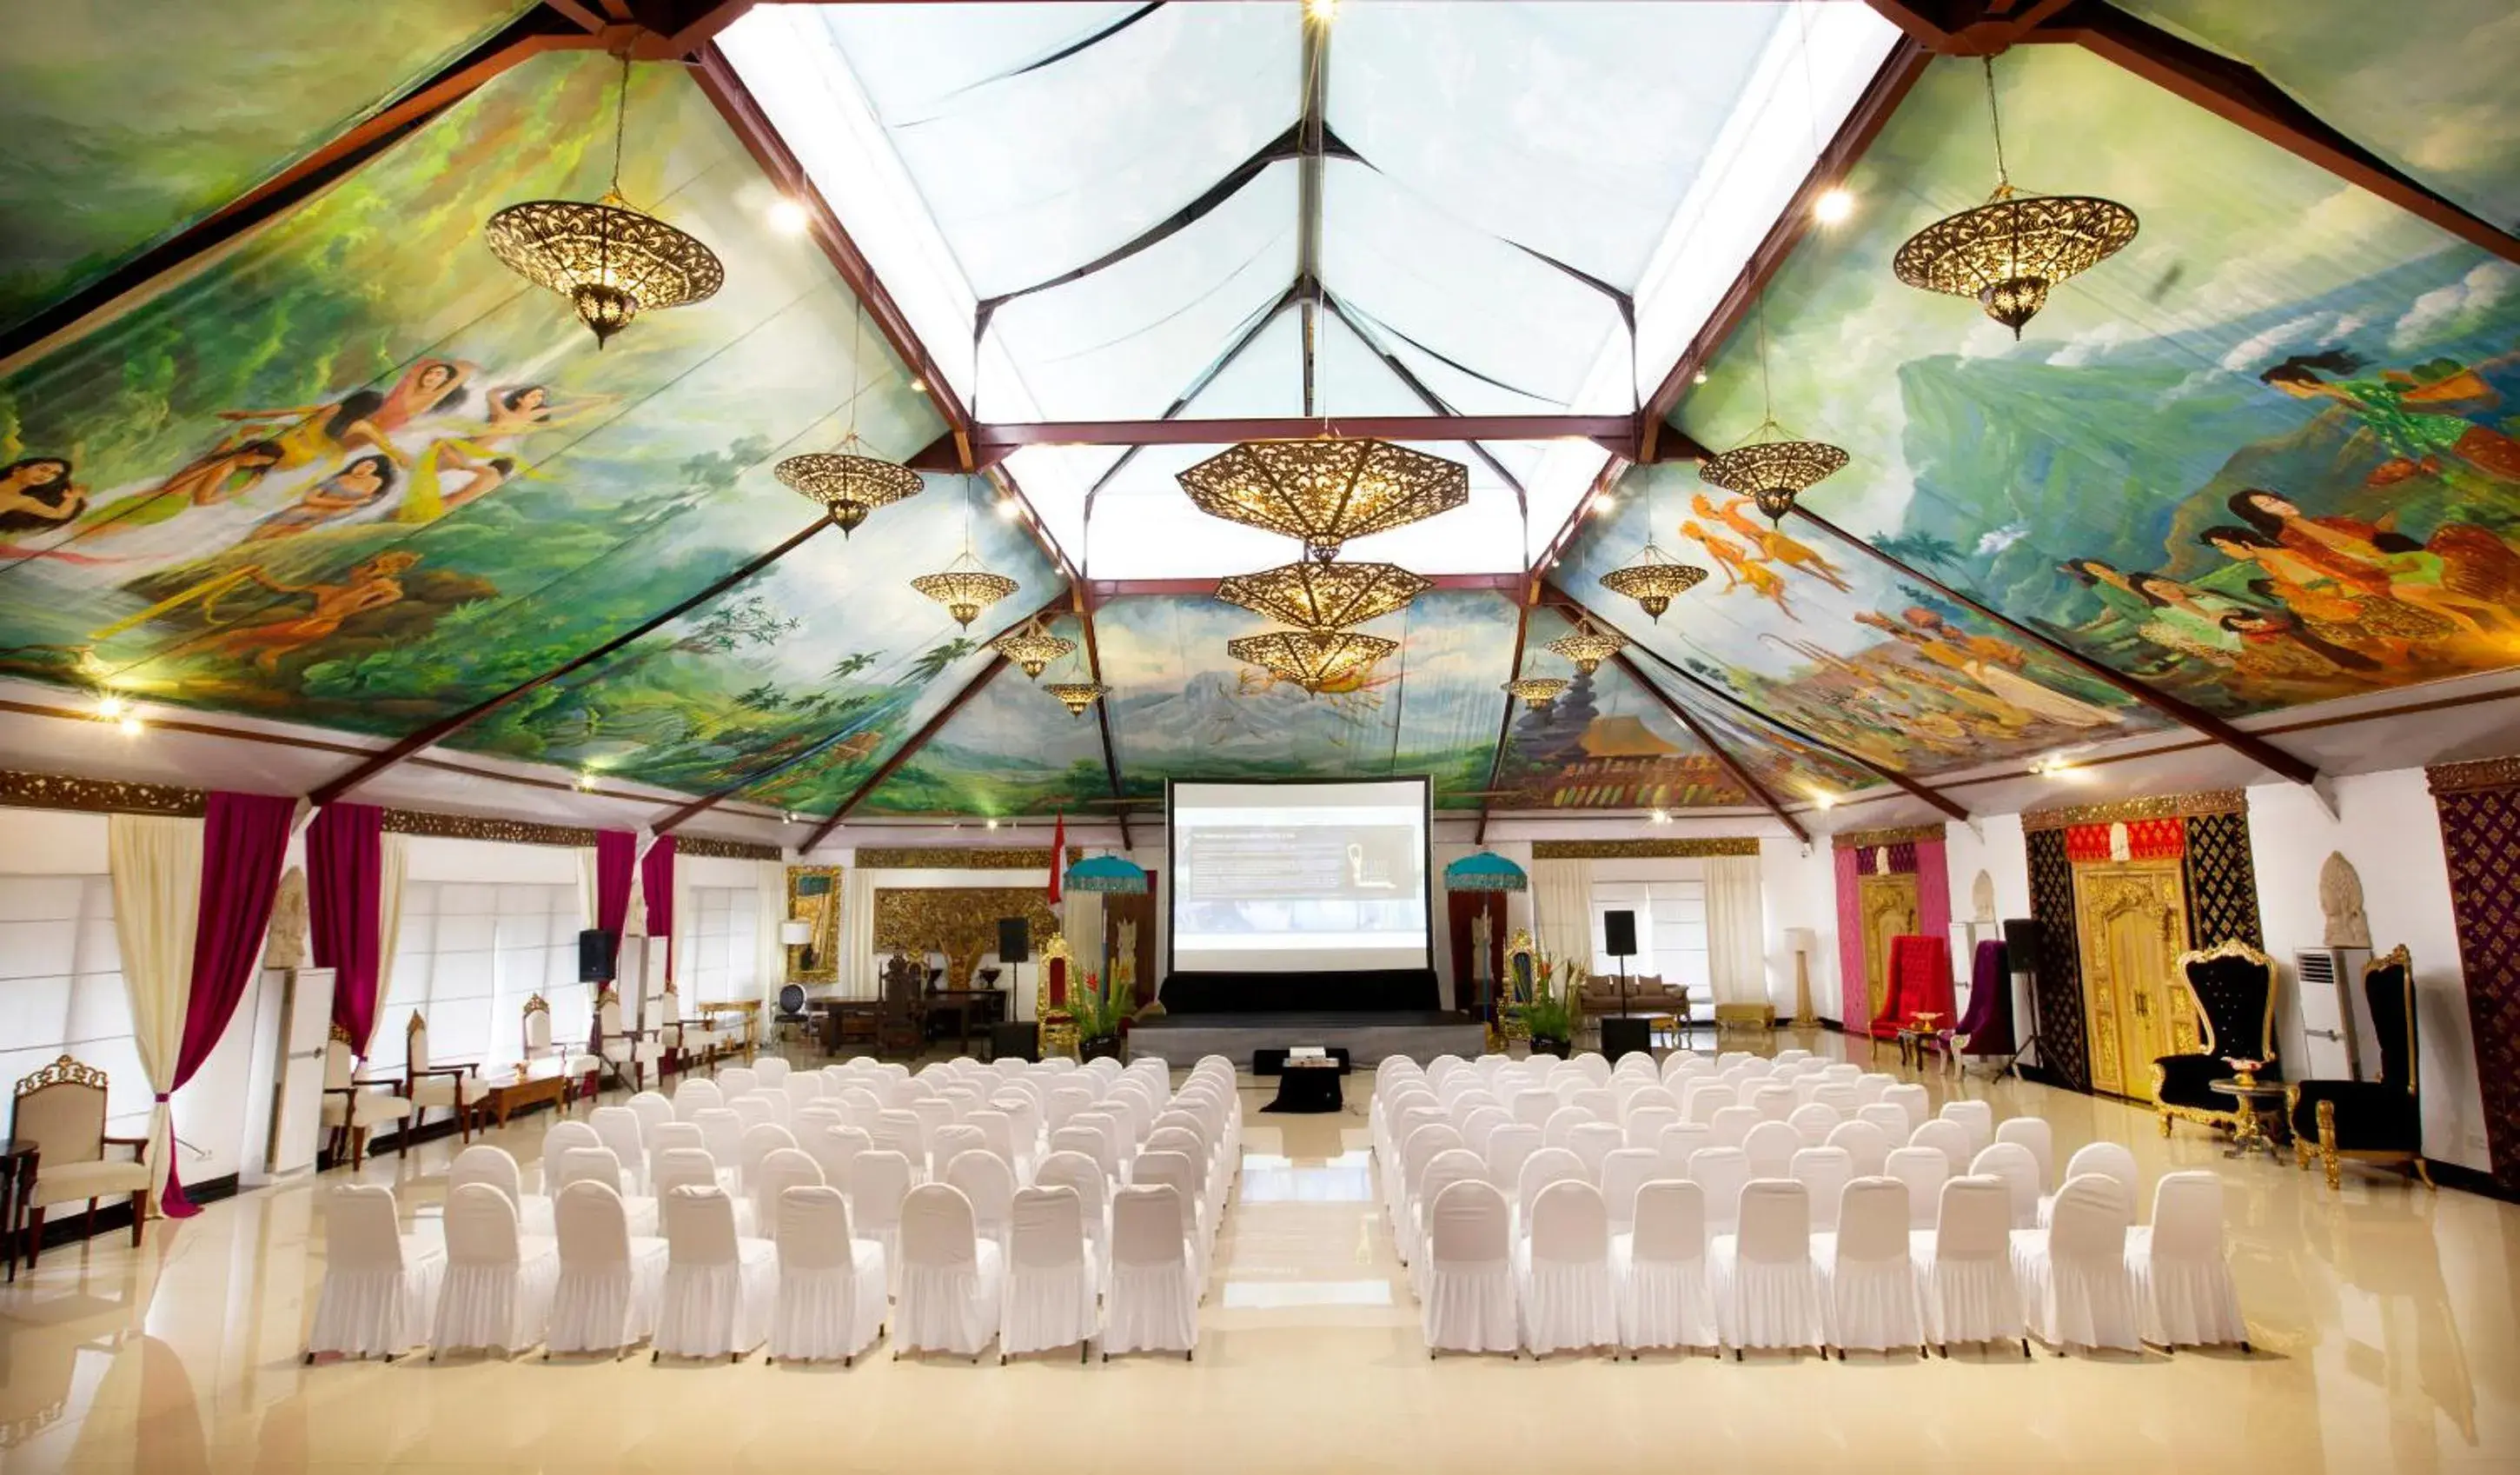 Area and facilities, Banquet Facilities in The Mansion Resort Hotel & Spa